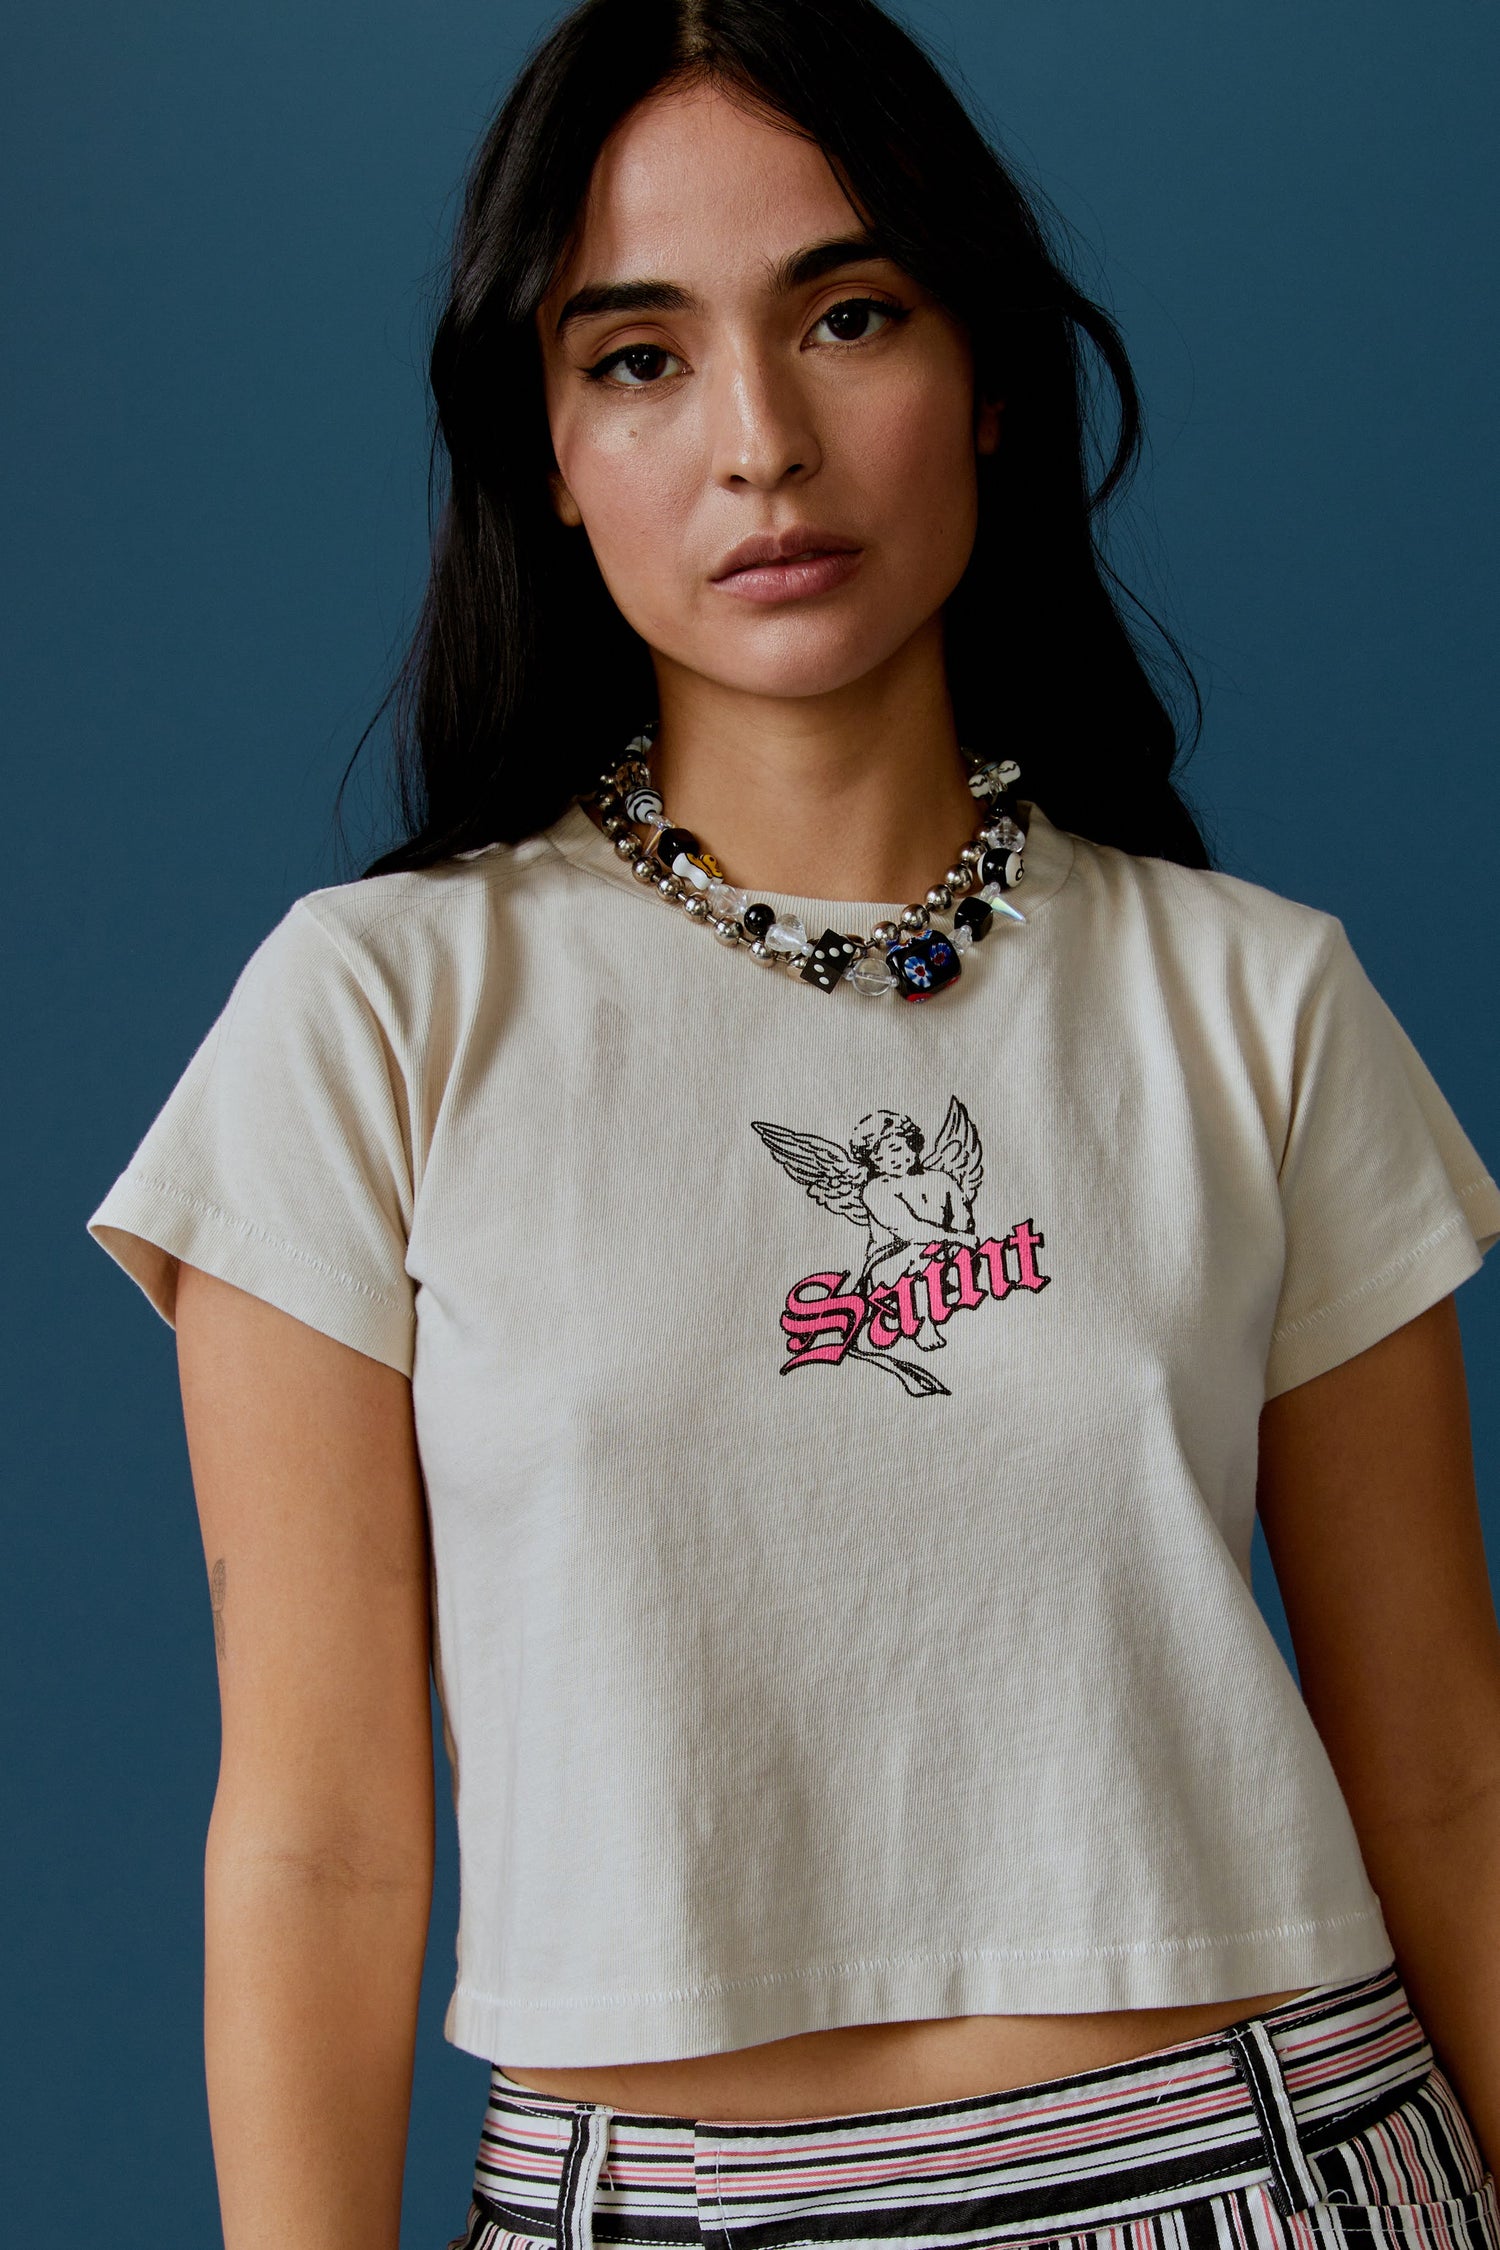 A dark-haired model features a white cropped tee designed with a baby angel in the center, stamped with 'Saint' in pink font in front.